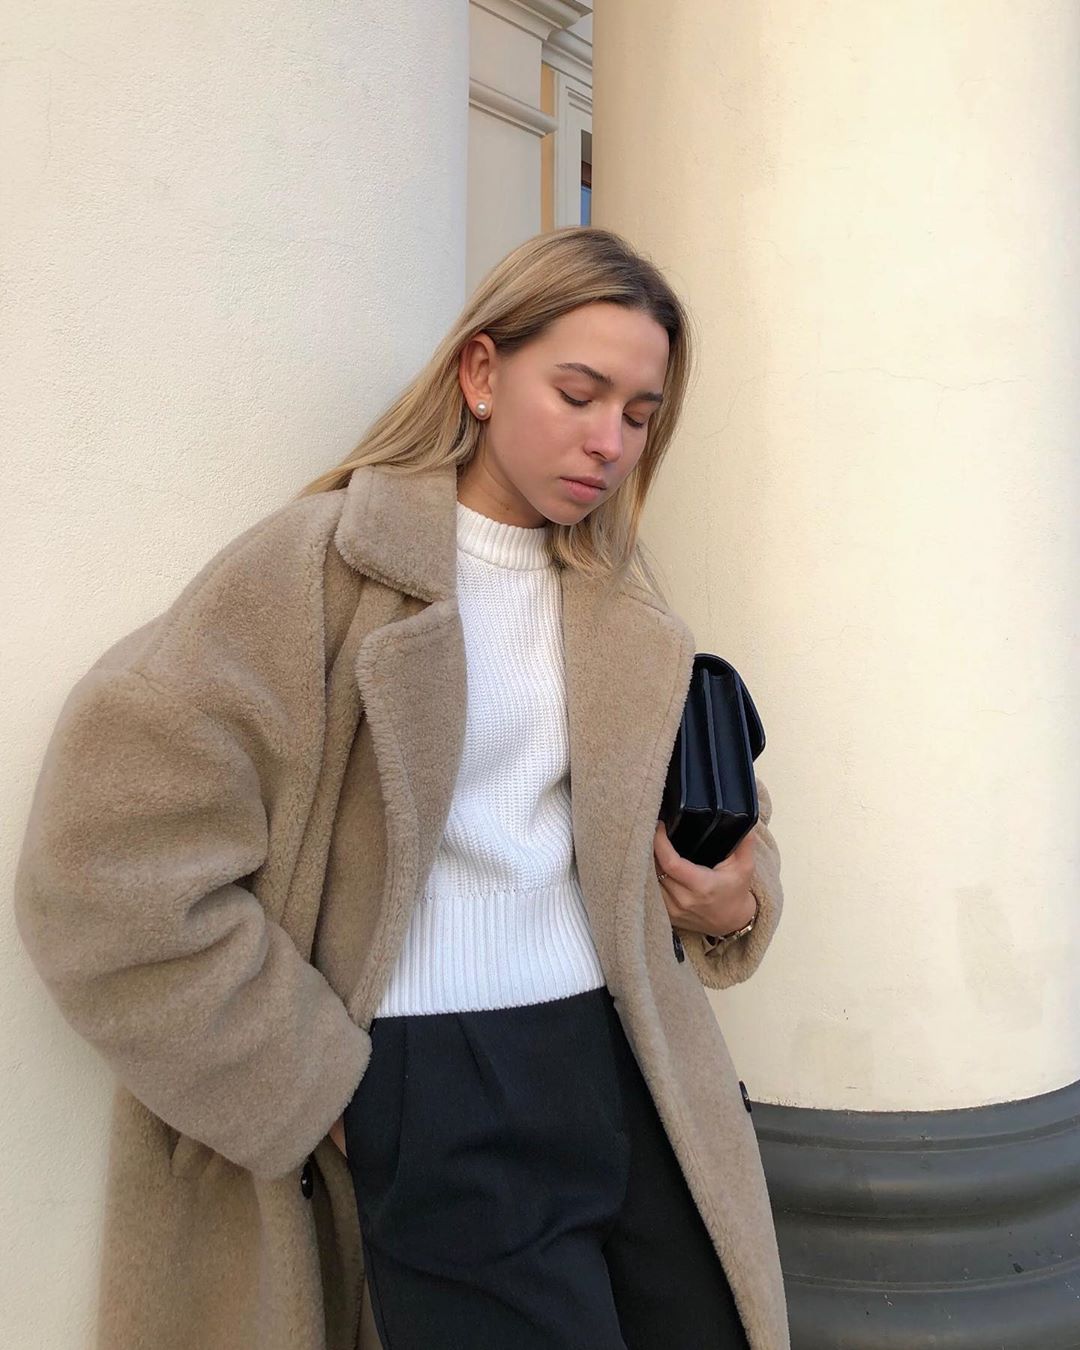 Cozy Yet Elevated Fall and Winter Outfit Idea — @mikhailova_maria In a Teddy Coat, White Knit Sweater, Black Clutch Bag, and Black Pants